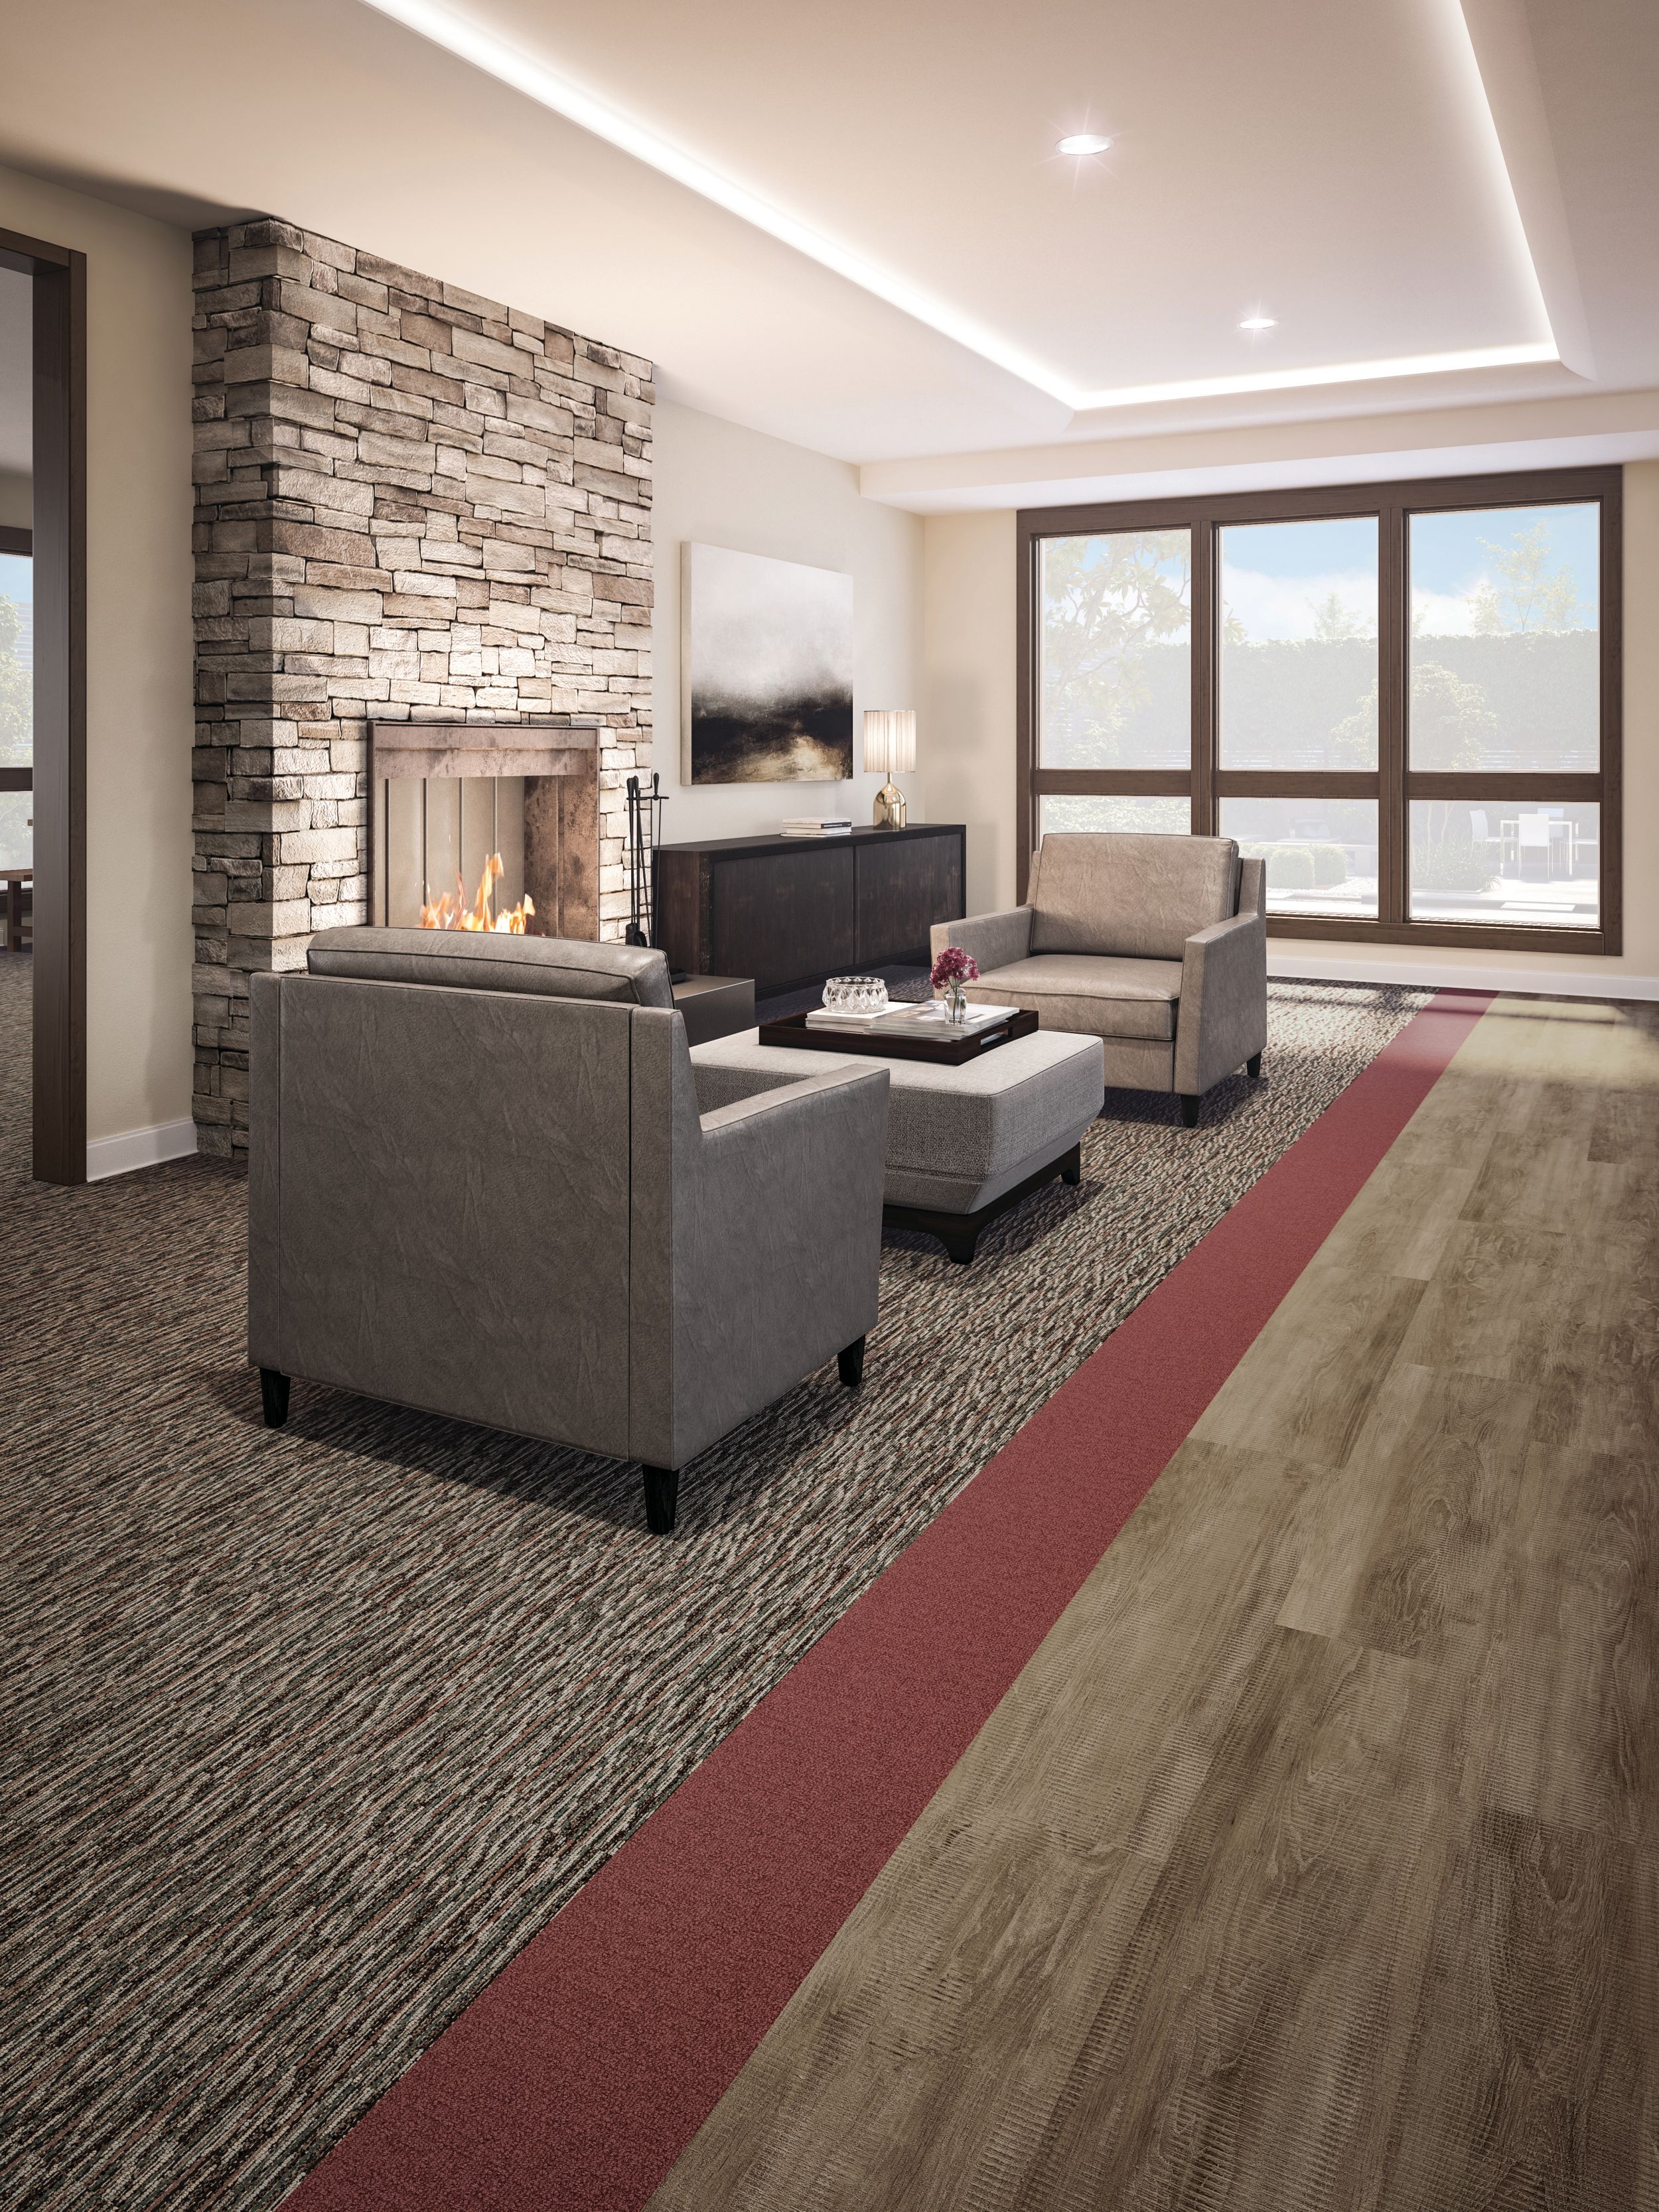 Interface Farmland and Monochrome carpet tile with Textured Woodograins LVT in senior housing seating area with stone fireplace numéro d’image 8